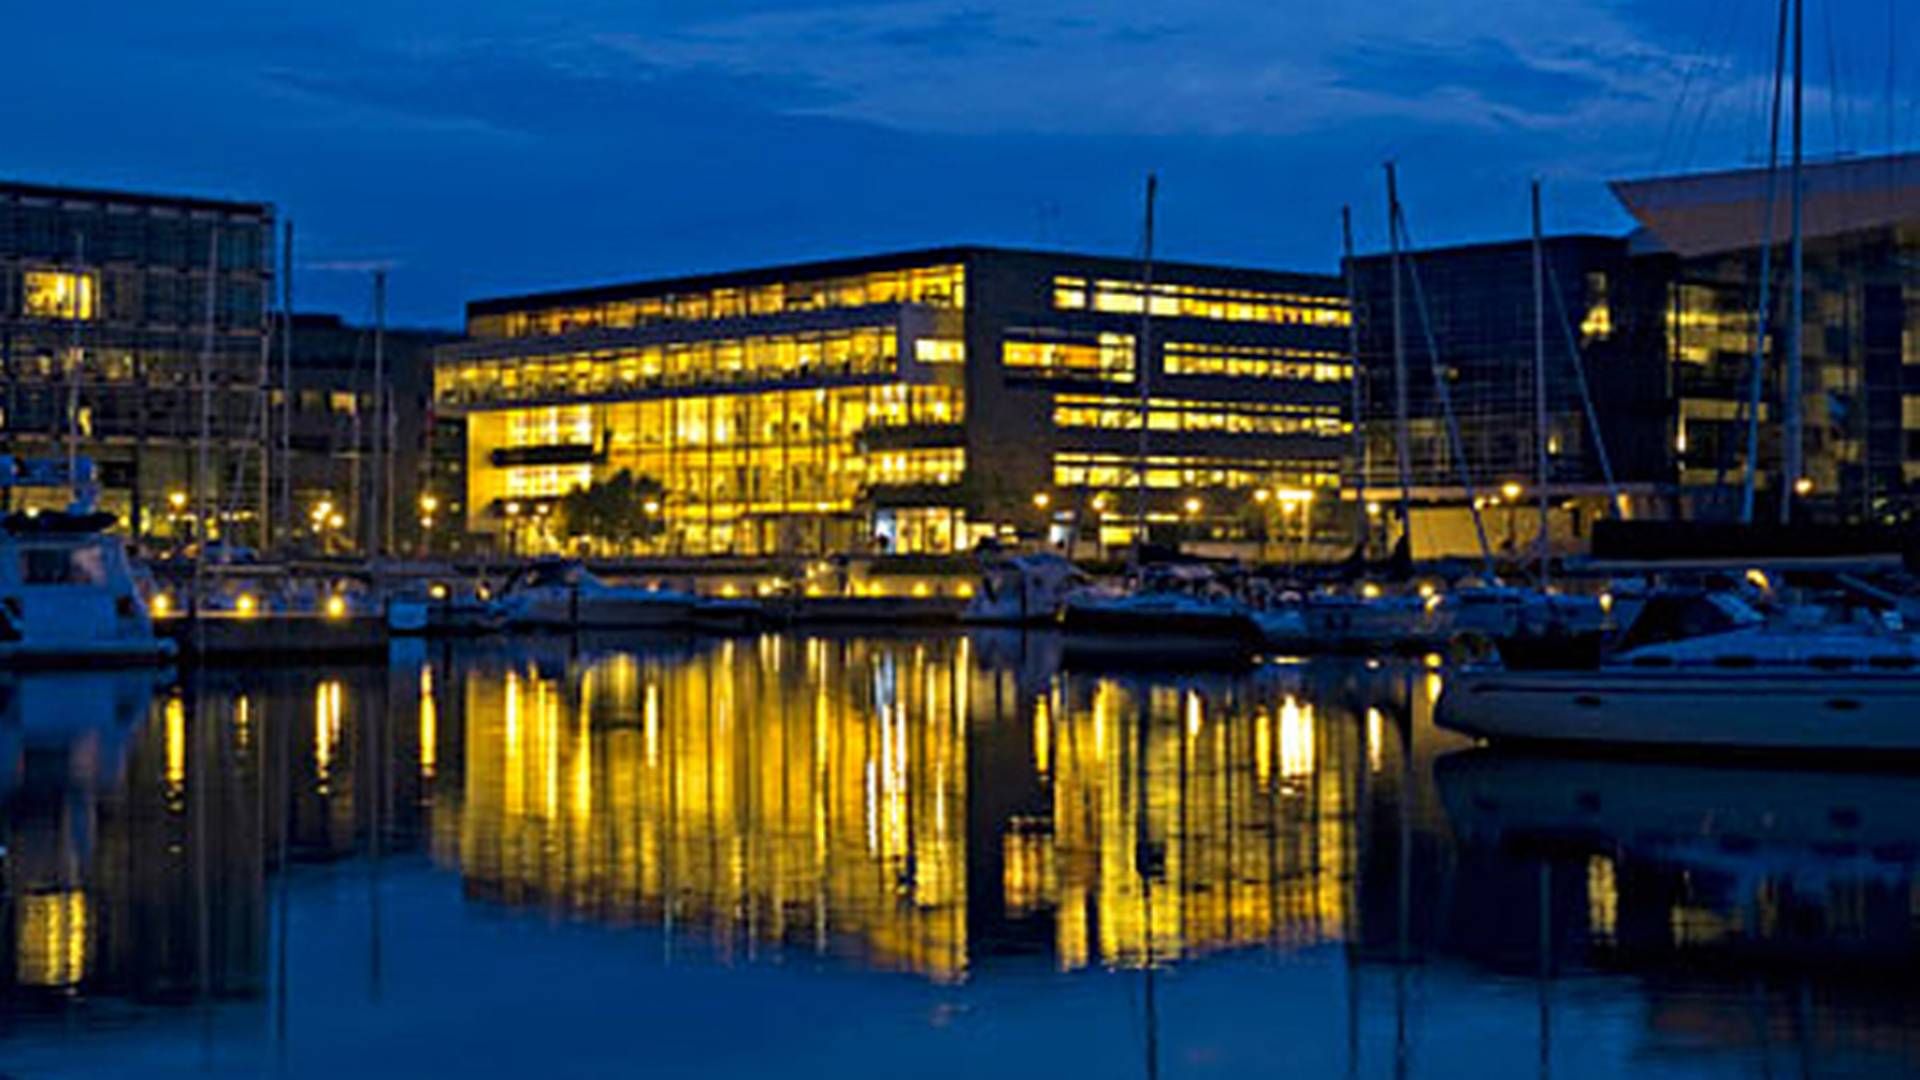 Aberdeen Standard Investments' premises in Copenhagen, a PFA-owned property. | Photo: PR.